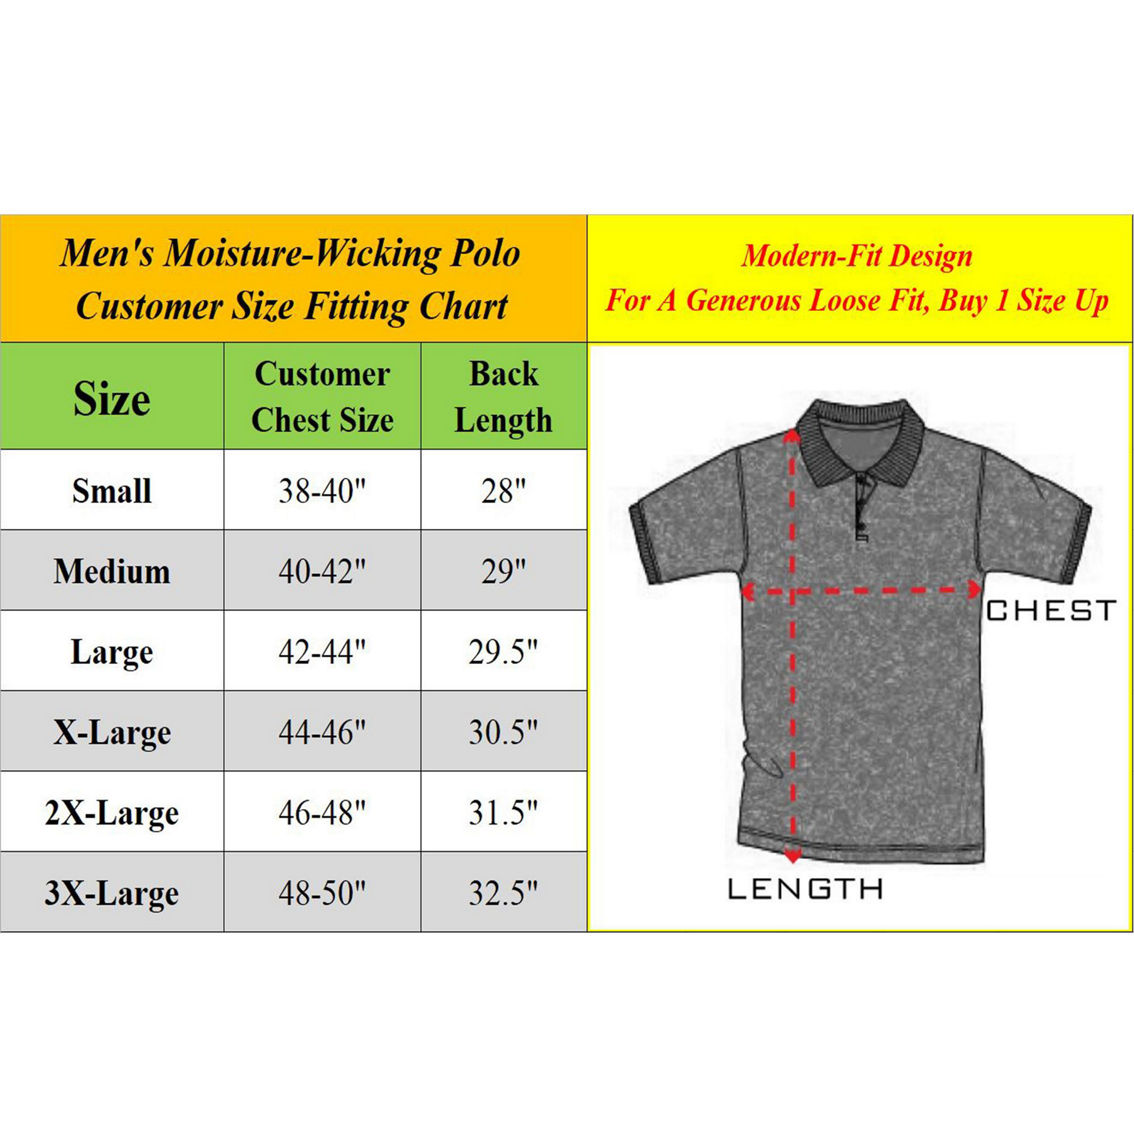 Galaxy By Harvic Men's Tagless Dry-Fit Moisture-Wicking Polo Shirt - Image 2 of 2